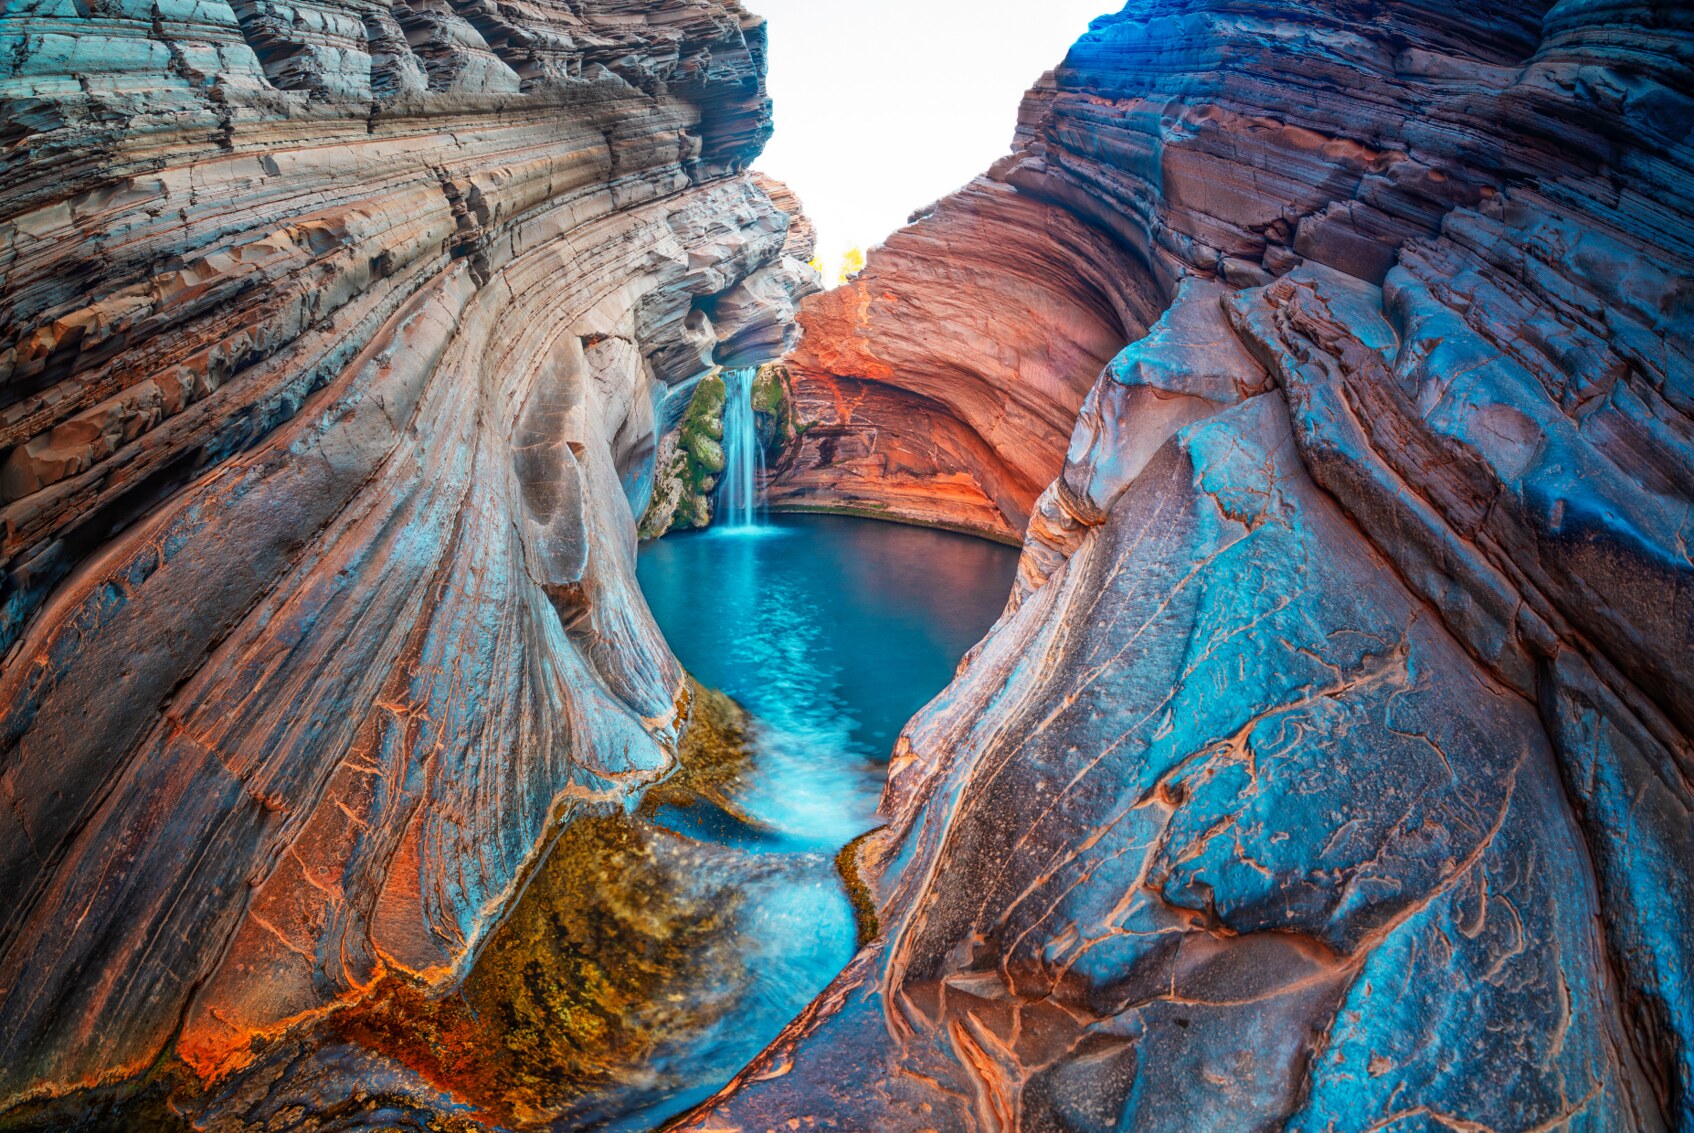 The stunning colours of the gorges and waterways of Karijini National Park